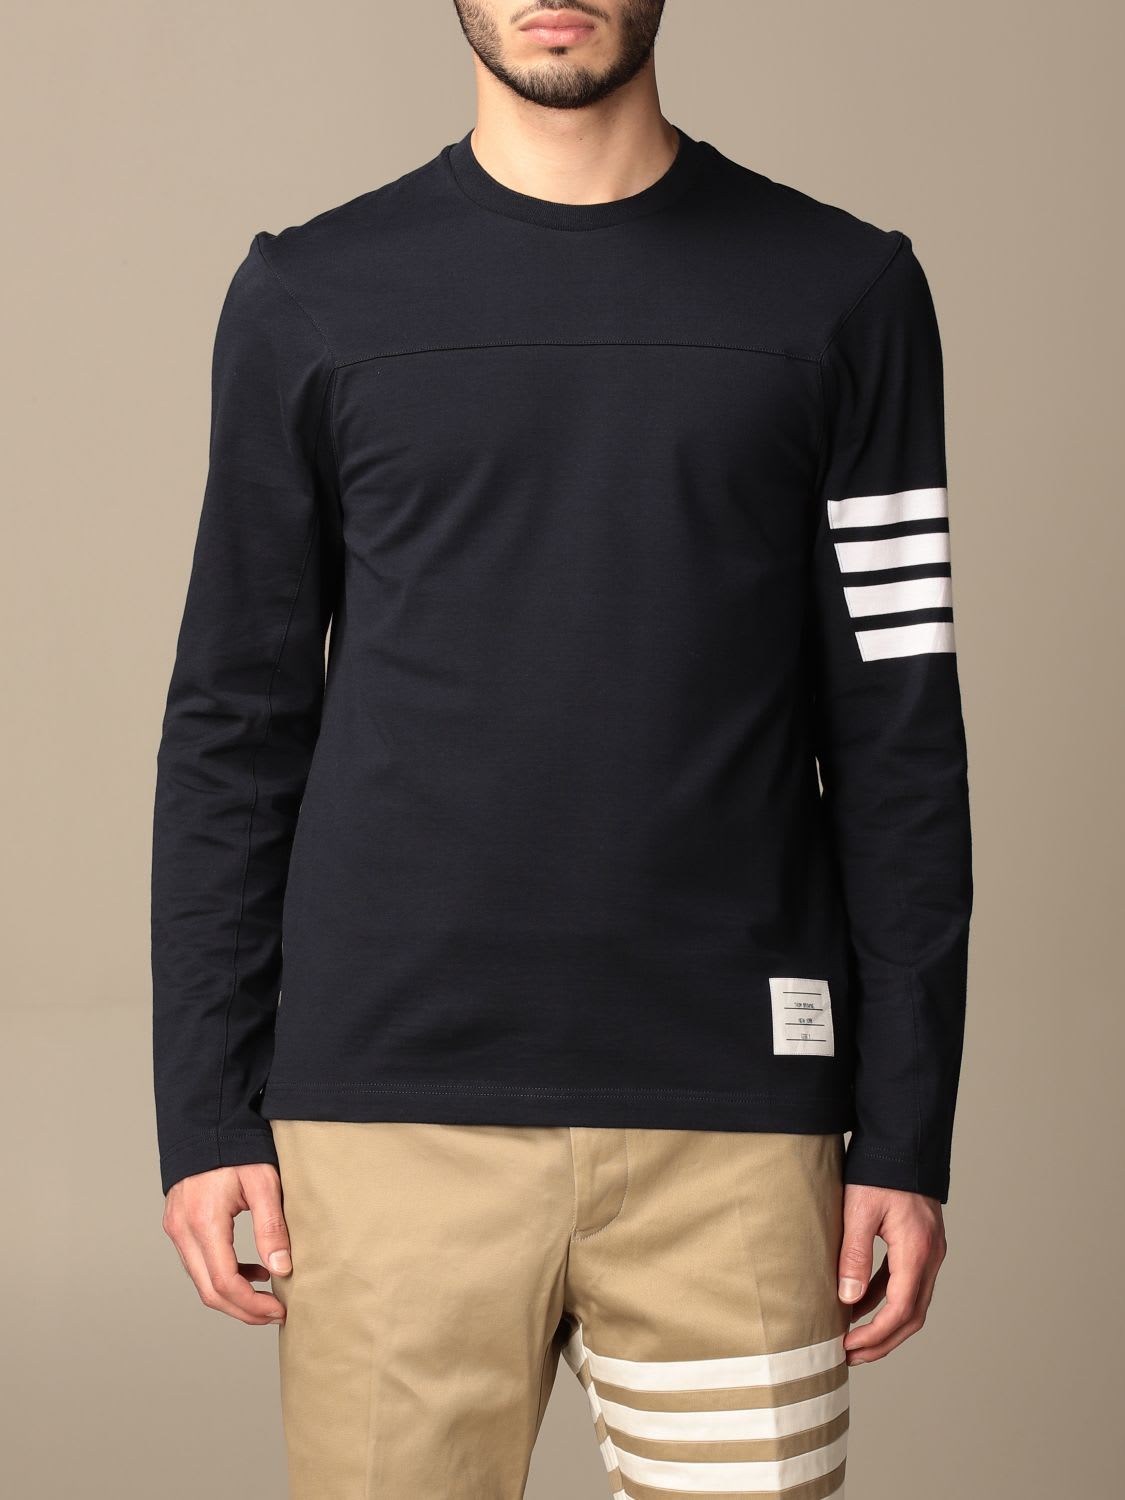 THOM BROWNE COTTON T-SHIRT WITH STRIPED DETAIL,MJS151A 06221 415